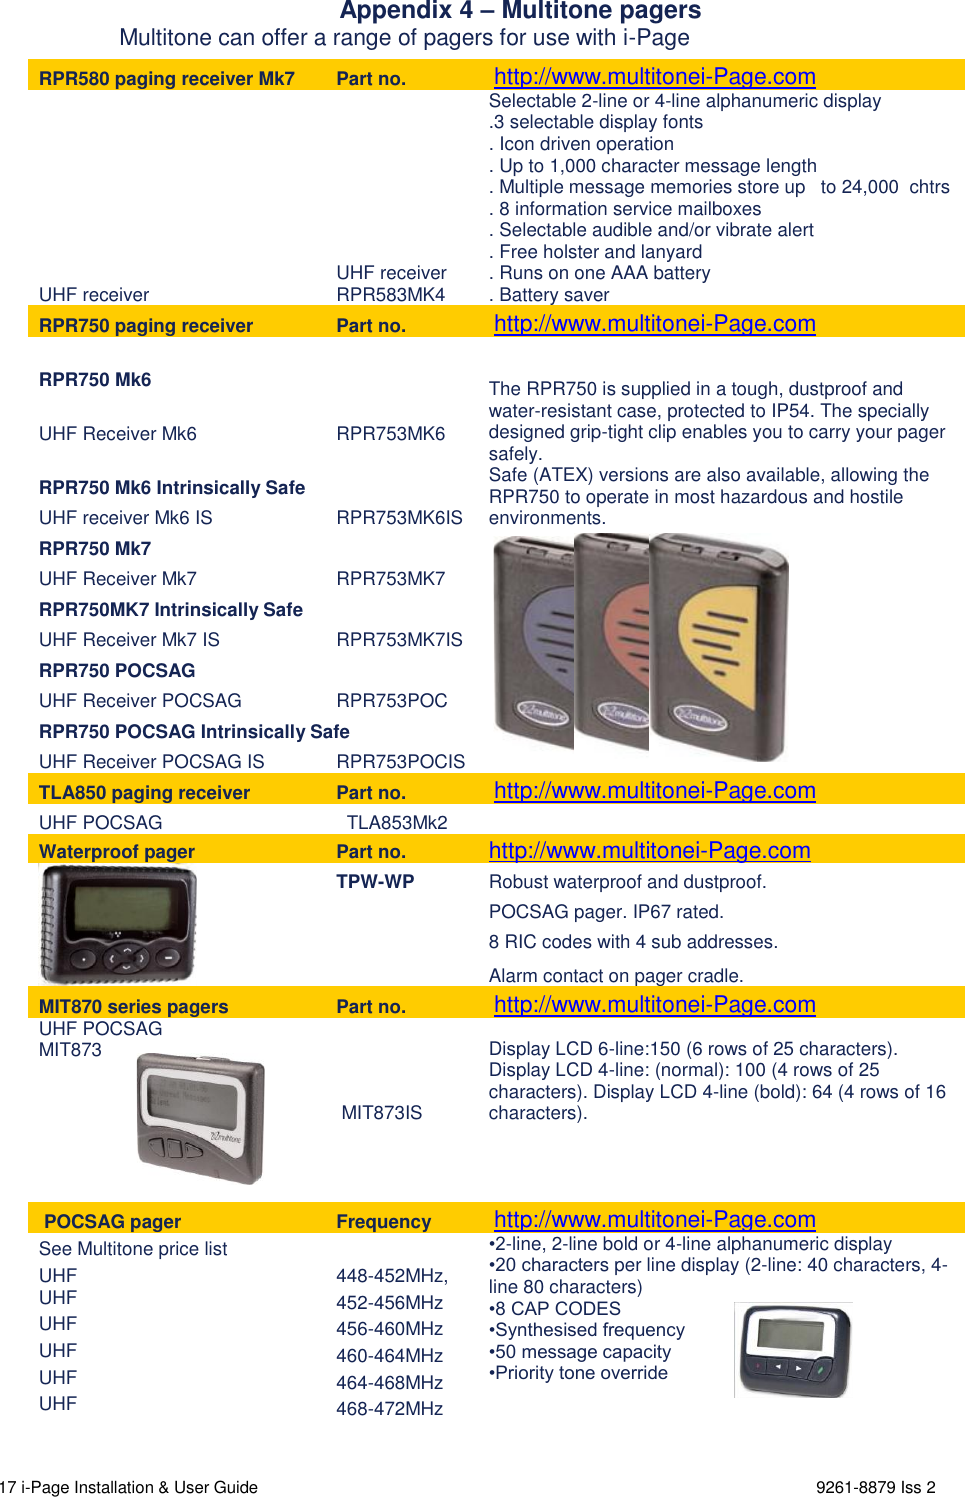  17 i-Page Installation &amp; User Guide                                                                      9261-8879 Iss 2                 Appendix 4 – Multitone pagers                    Multitone can offer a range of pagers for use with i-Page  RPR580 paging receiver Mk7 Part no.  http://www.multitonei-Page.com UHF receiver UHF receiver RPR583MK4 Selectable 2-line or 4-line alphanumeric display .3 selectable display fonts . Icon driven operation . Up to 1,000 character message length . Multiple message memories store up   to 24,000  chtrs . 8 information service mailboxes . Selectable audible and/or vibrate alert . Free holster and lanyard . Runs on one AAA battery . Battery saver RPR750 paging receiver Part no.  http://www.multitonei-Page.com RPR750 Mk6  The RPR750 is supplied in a tough, dustproof and water-resistant case, protected to IP54. The specially designed grip-tight clip enables you to carry your pager safely. Safe (ATEX) versions are also available, allowing the RPR750 to operate in most hazardous and hostile environments. UHF Receiver Mk6 RPR753MK6 RPR750 Mk6 Intrinsically Safe UHF receiver Mk6 IS RPR753MK6IS RPR750 Mk7   UHF Receiver Mk7 RPR753MK7 RPR750MK7 Intrinsically Safe UHF Receiver Mk7 IS RPR753MK7IS RPR750 POCSAG  UHF Receiver POCSAG RPR753POC RPR750 POCSAG Intrinsically Safe UHF Receiver POCSAG IS RPR753POCIS TLA850 paging receiver  Part no.  http://www.multitonei-Page.com UHF POCSAG   TLA853Mk2  Waterproof pager Part no. http://www.multitonei-Page.com  TPW-WP Robust waterproof and dustproof.   POCSAG pager. IP67 rated.  8 RIC codes with 4 sub addresses.  Alarm contact on pager cradle. MIT870 series pagers  Part no.  http://www.multitonei-Page.com UHF POCSAG MIT873   MIT873IS Display LCD 6-line:150 (6 rows of 25 characters).           Display LCD 4-line: (normal): 100 (4 rows of 25 characters). Display LCD 4-line (bold): 64 (4 rows of 16 characters).       POCSAG pager Frequency  http://www.multitonei-Page.com See Multitone price list  •2-line, 2-line bold or 4-line alphanumeric display  •20 characters per line display (2-line: 40 characters, 4-line 80 characters) •8 CAP CODES •Synthesised frequency •50 message capacity •Priority tone override   UHF 448-452MHz, UHF 452-456MHz UHF 456-460MHz UHF 460-464MHz UHF 464-468MHz UHF 468-472MHz    